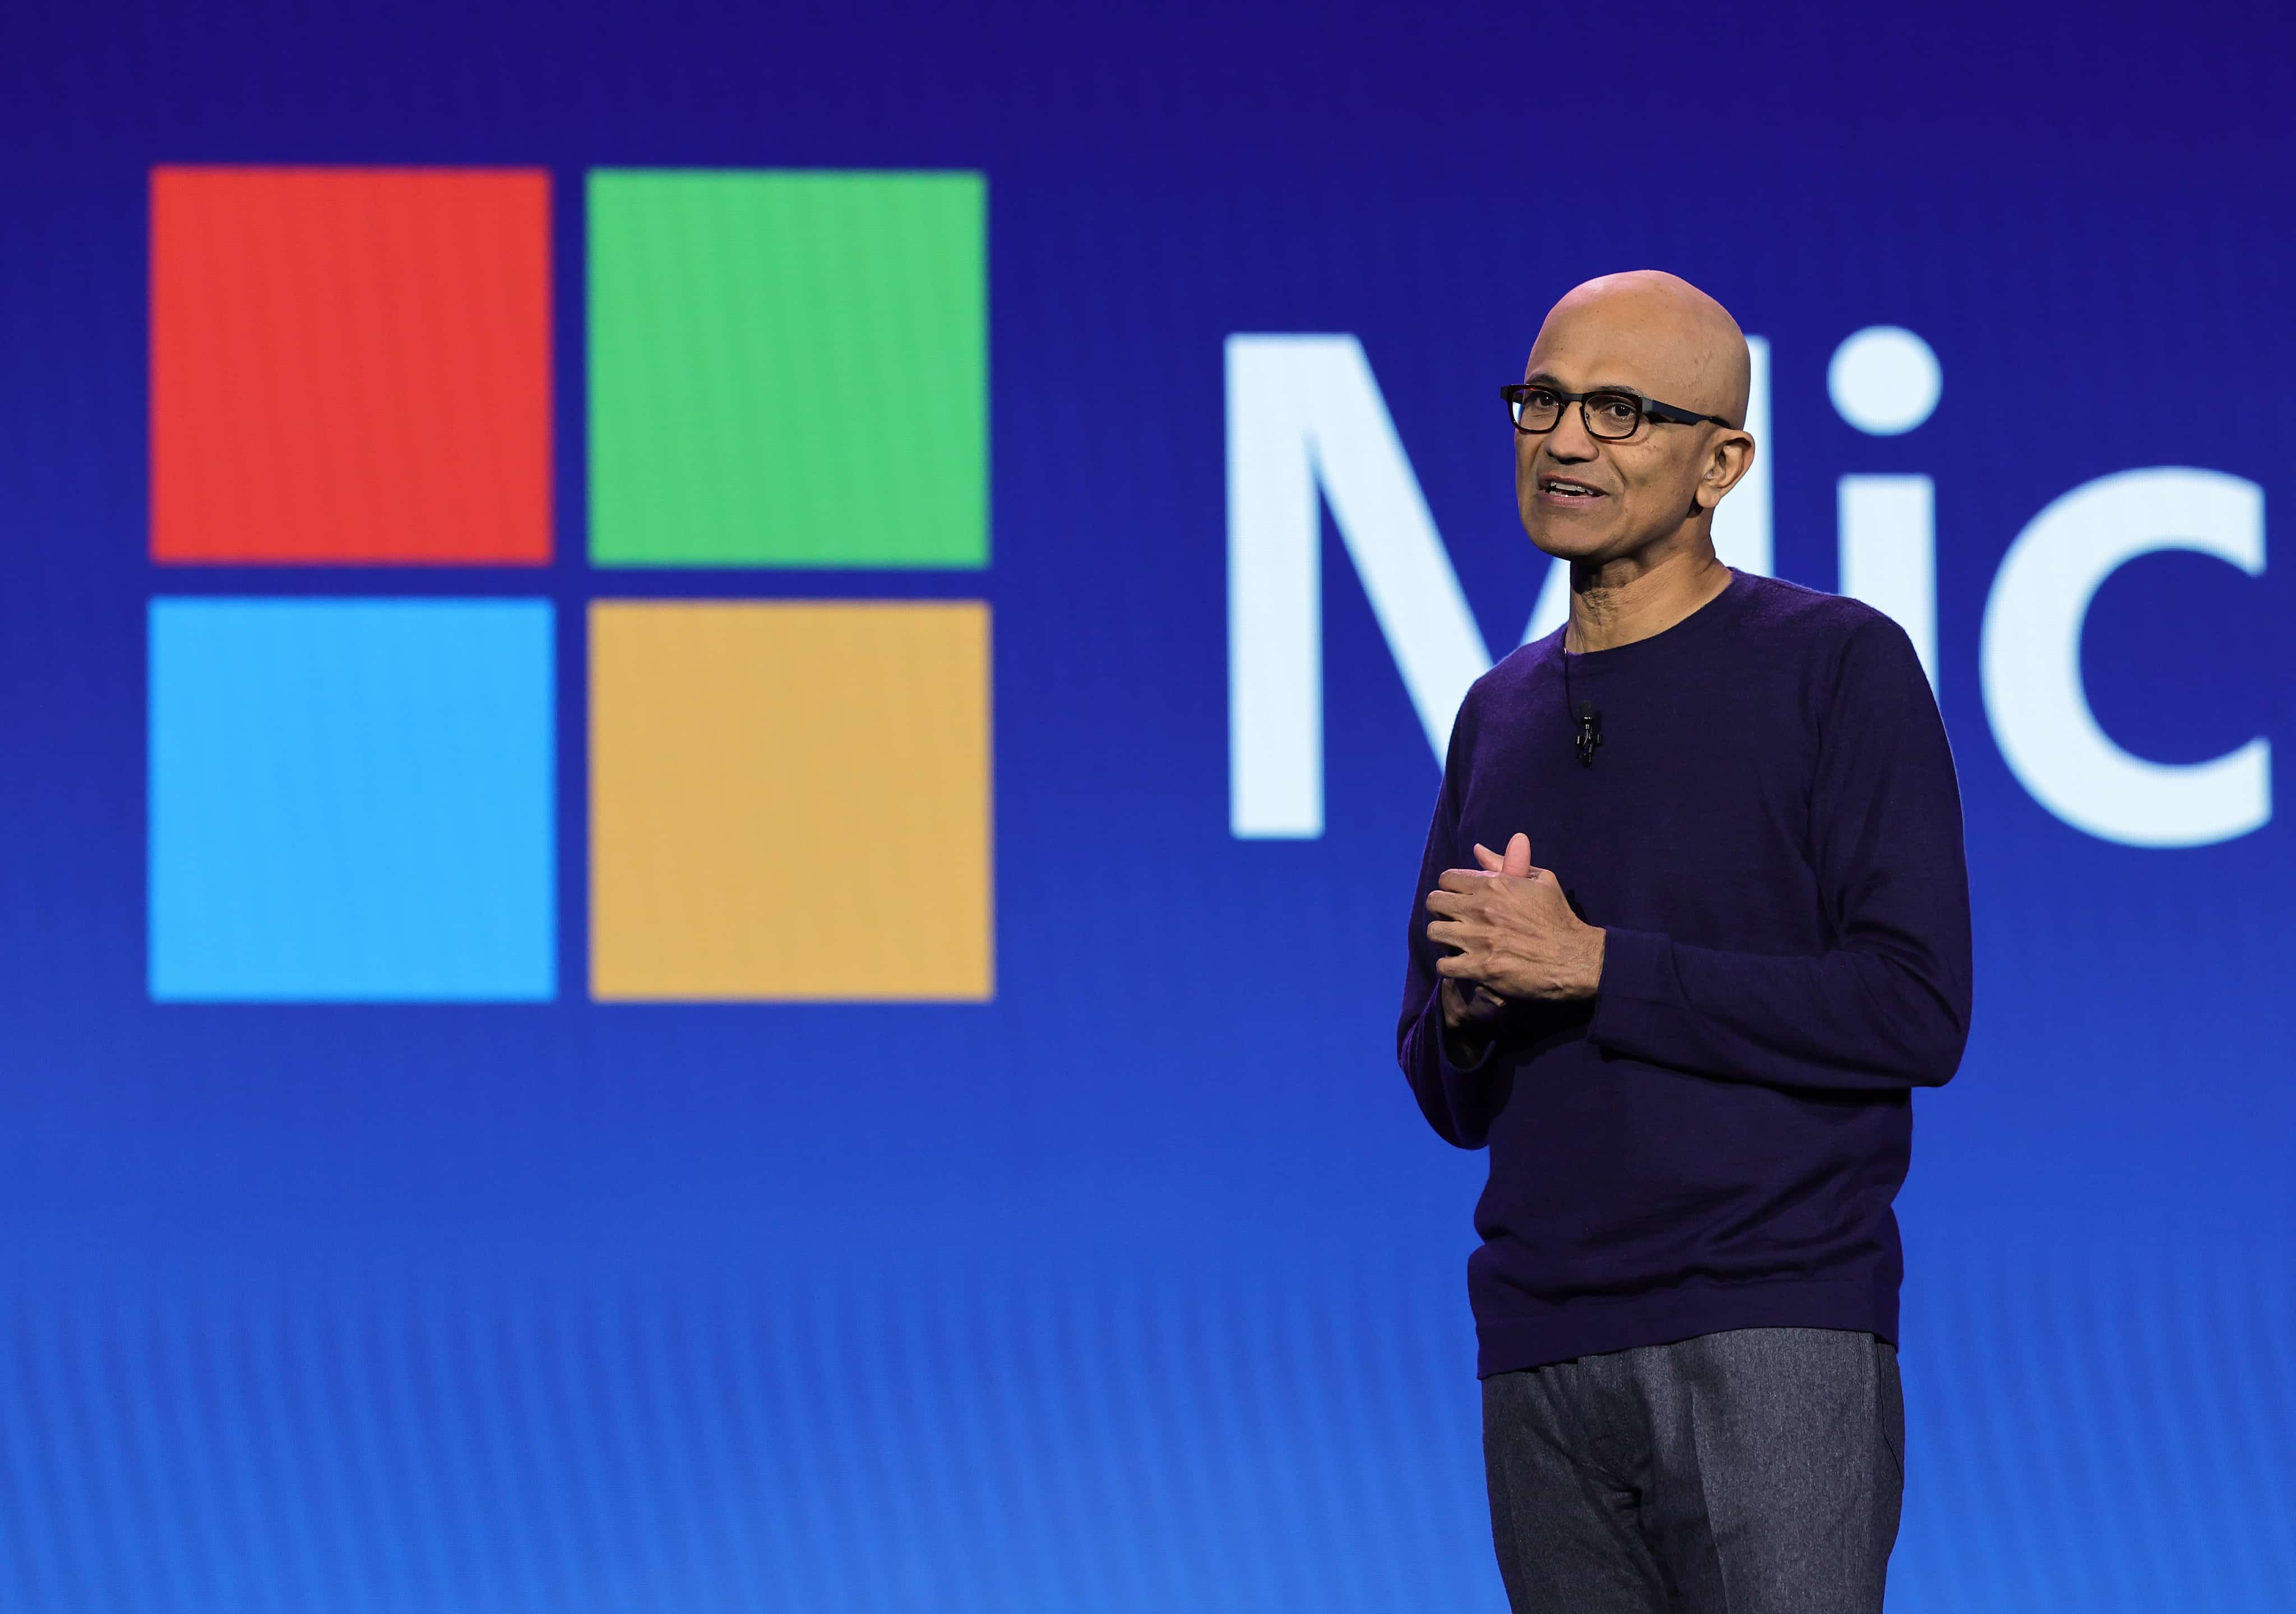 Microsoft to Train 2M Indian Workers in AI by 2025